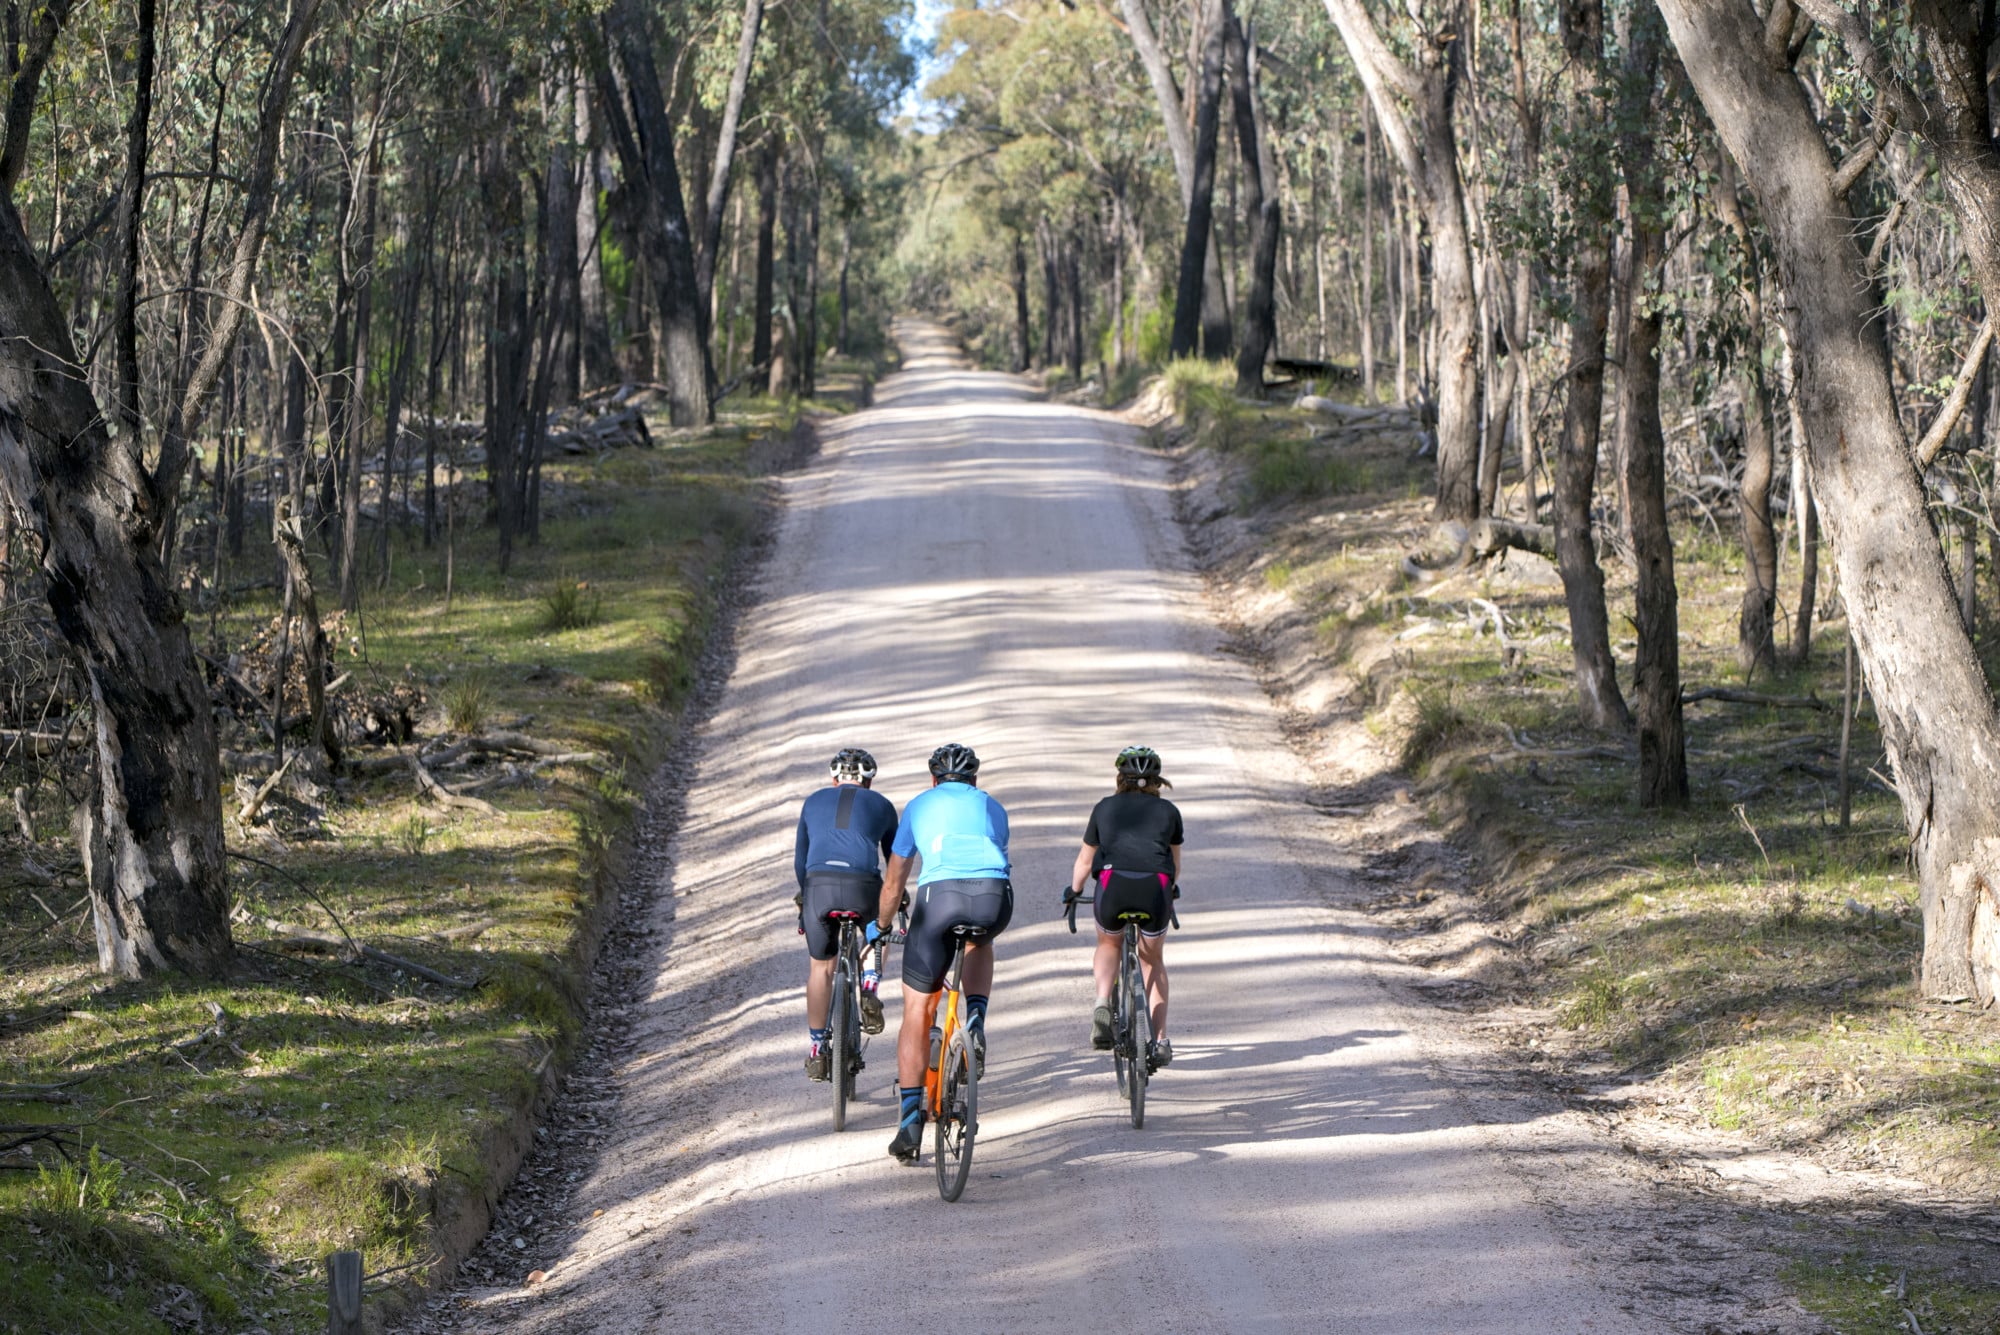 Cyclists riding the smooth gravel roads of the Mt Pilot_cHiltern national park.